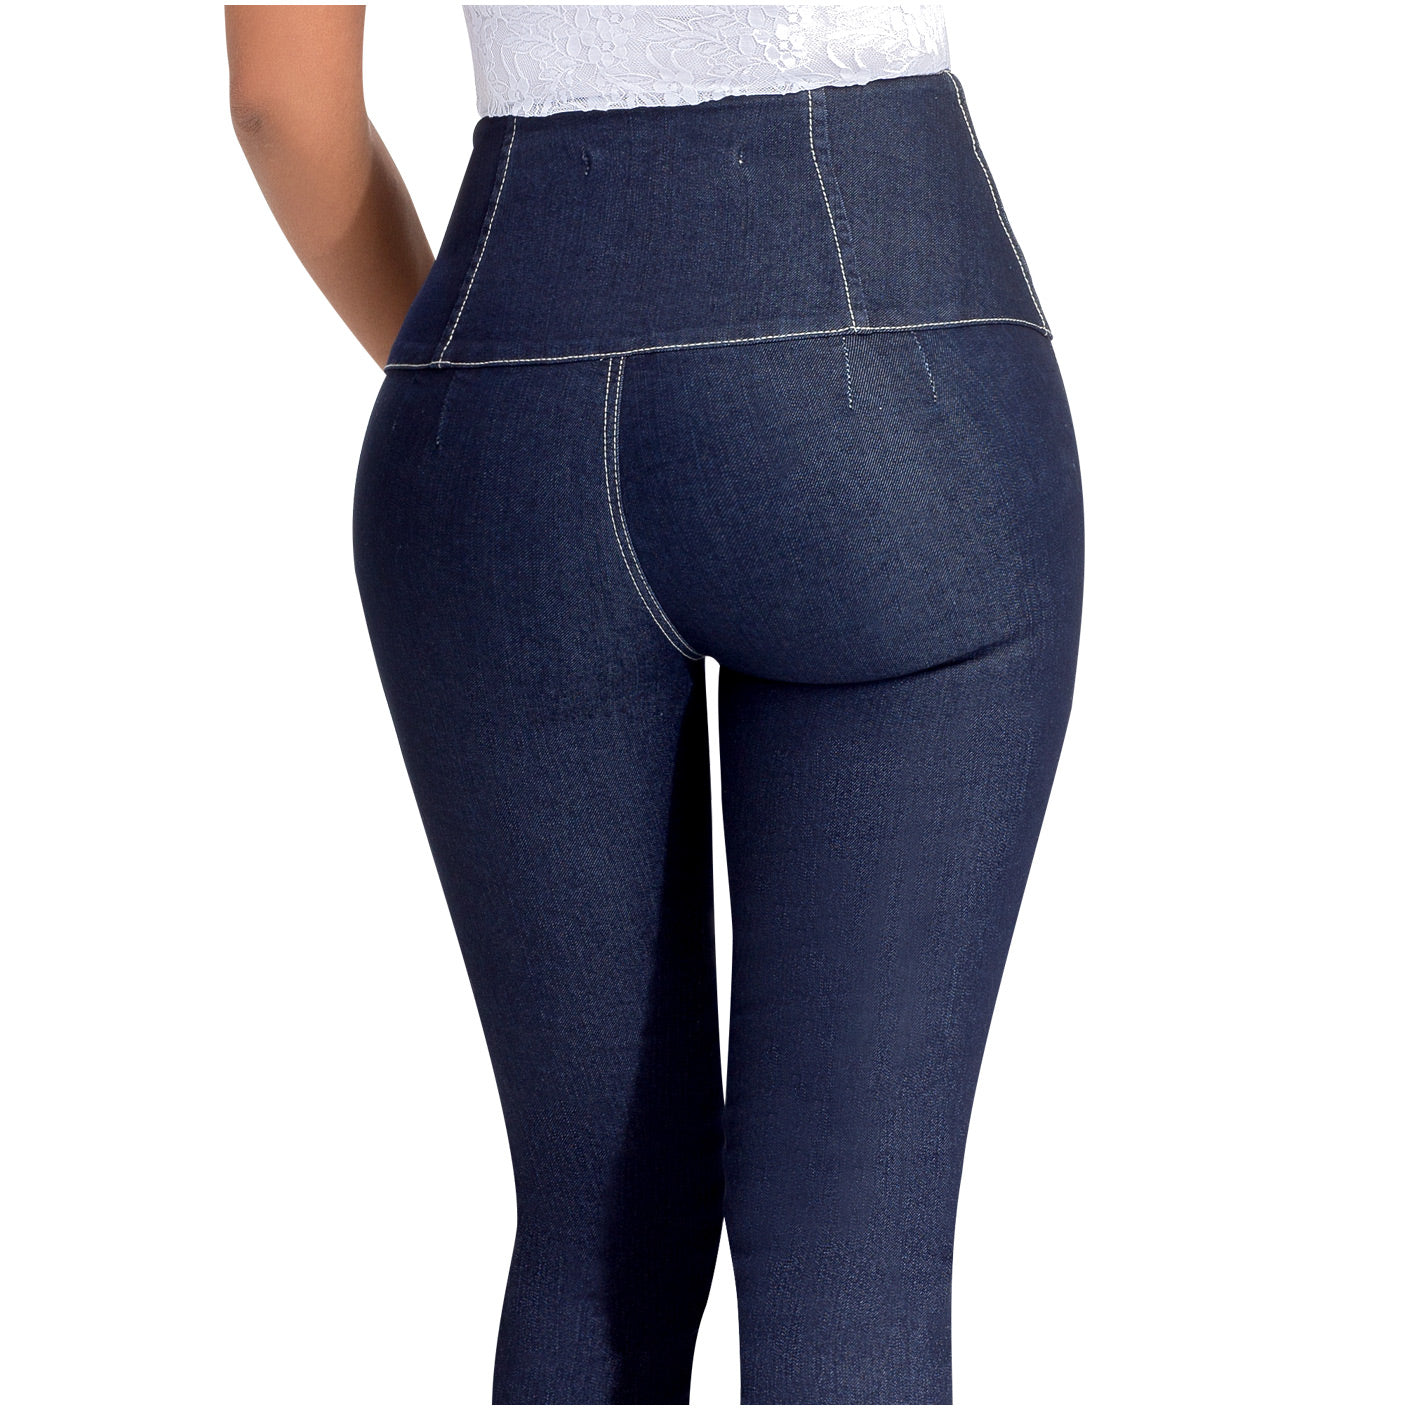 LOWLA: 217205 - Wide Waistband Compression Jeans - Showmee Store